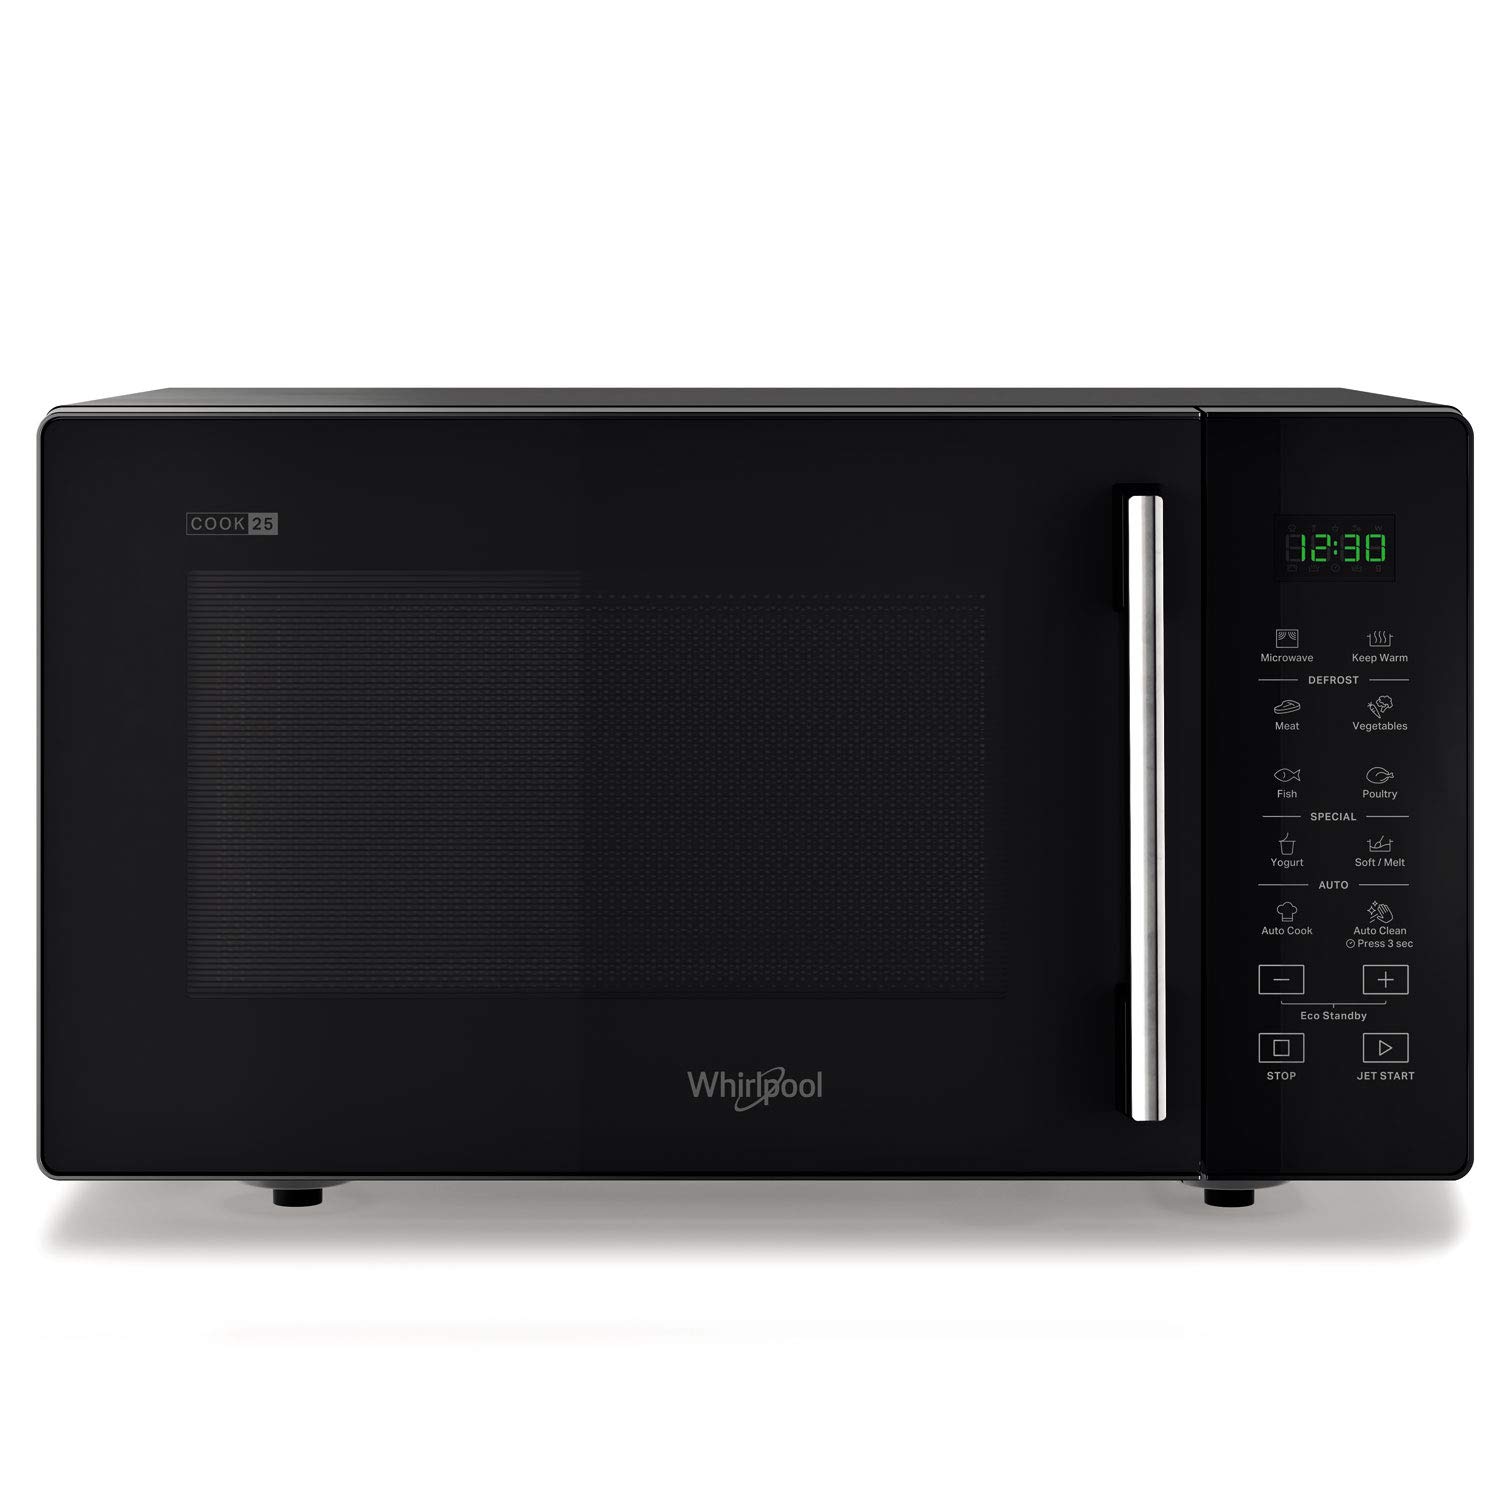 WHIRLPOOL - MICROWAVE OVEN 50052 MAGICOOK PRO 26CE 25 LTR